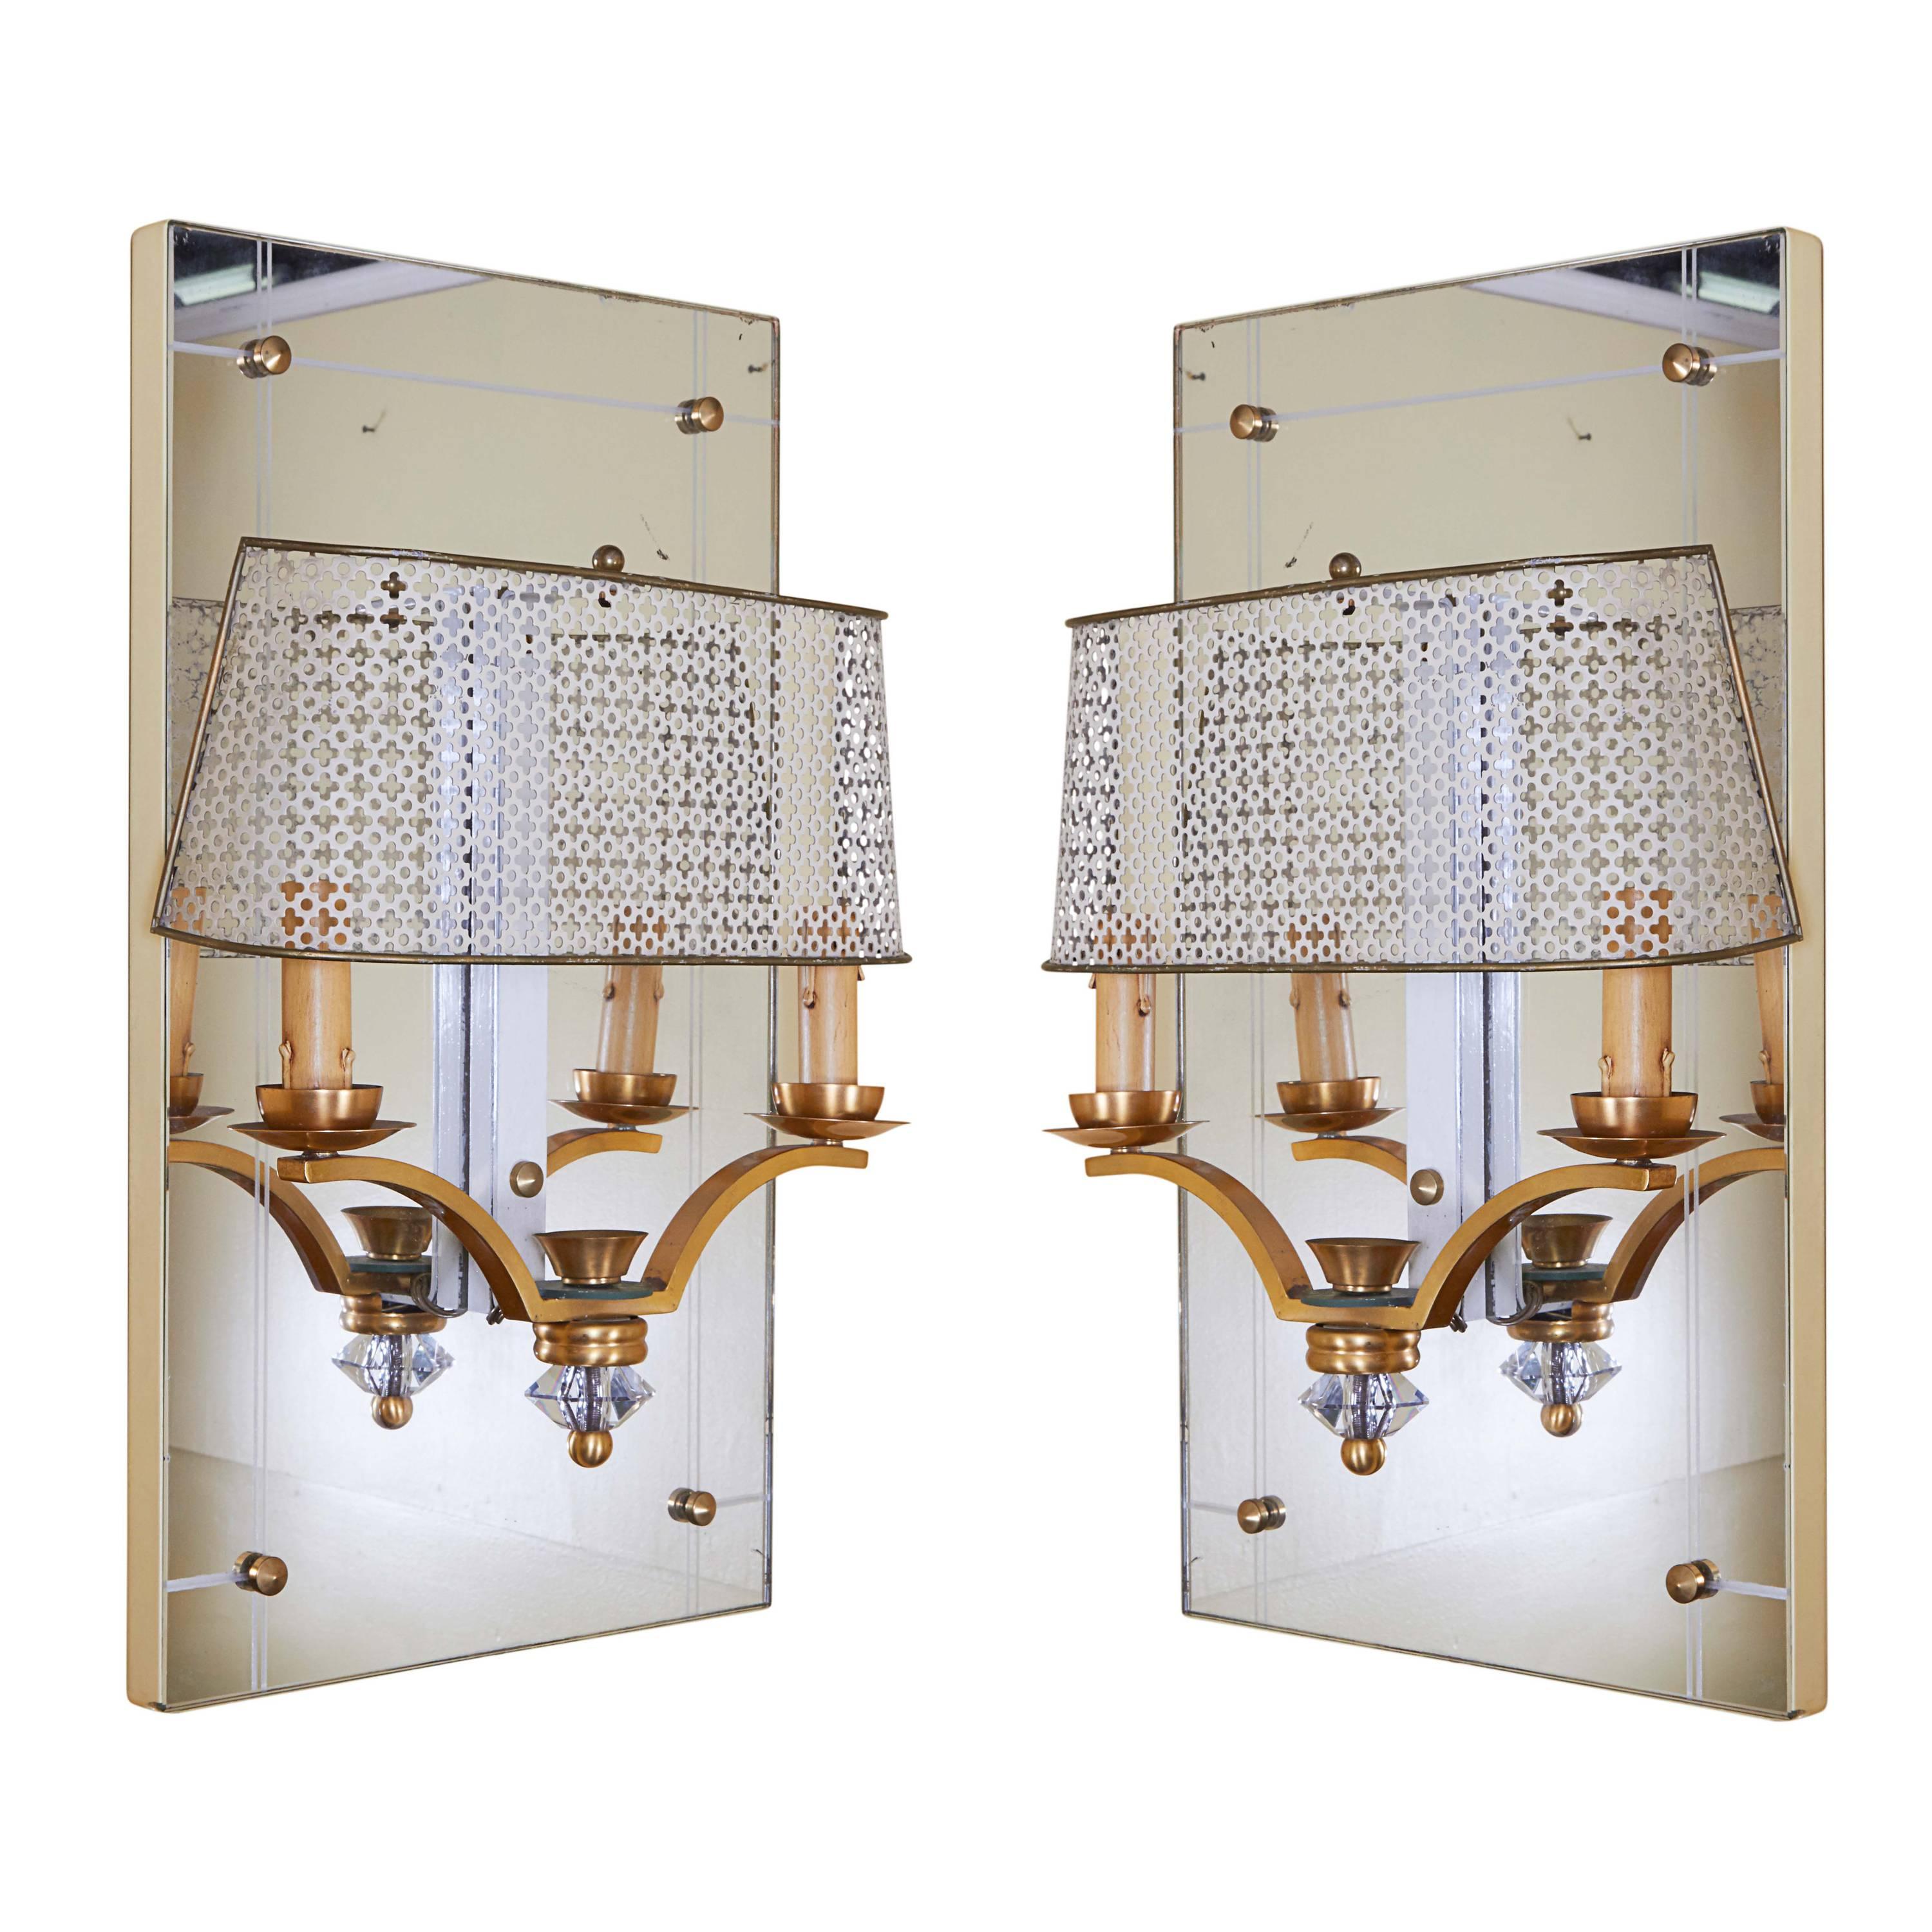 Pair of Italian Two-Light Sconces with Perforated Shades and Mirror Backplates